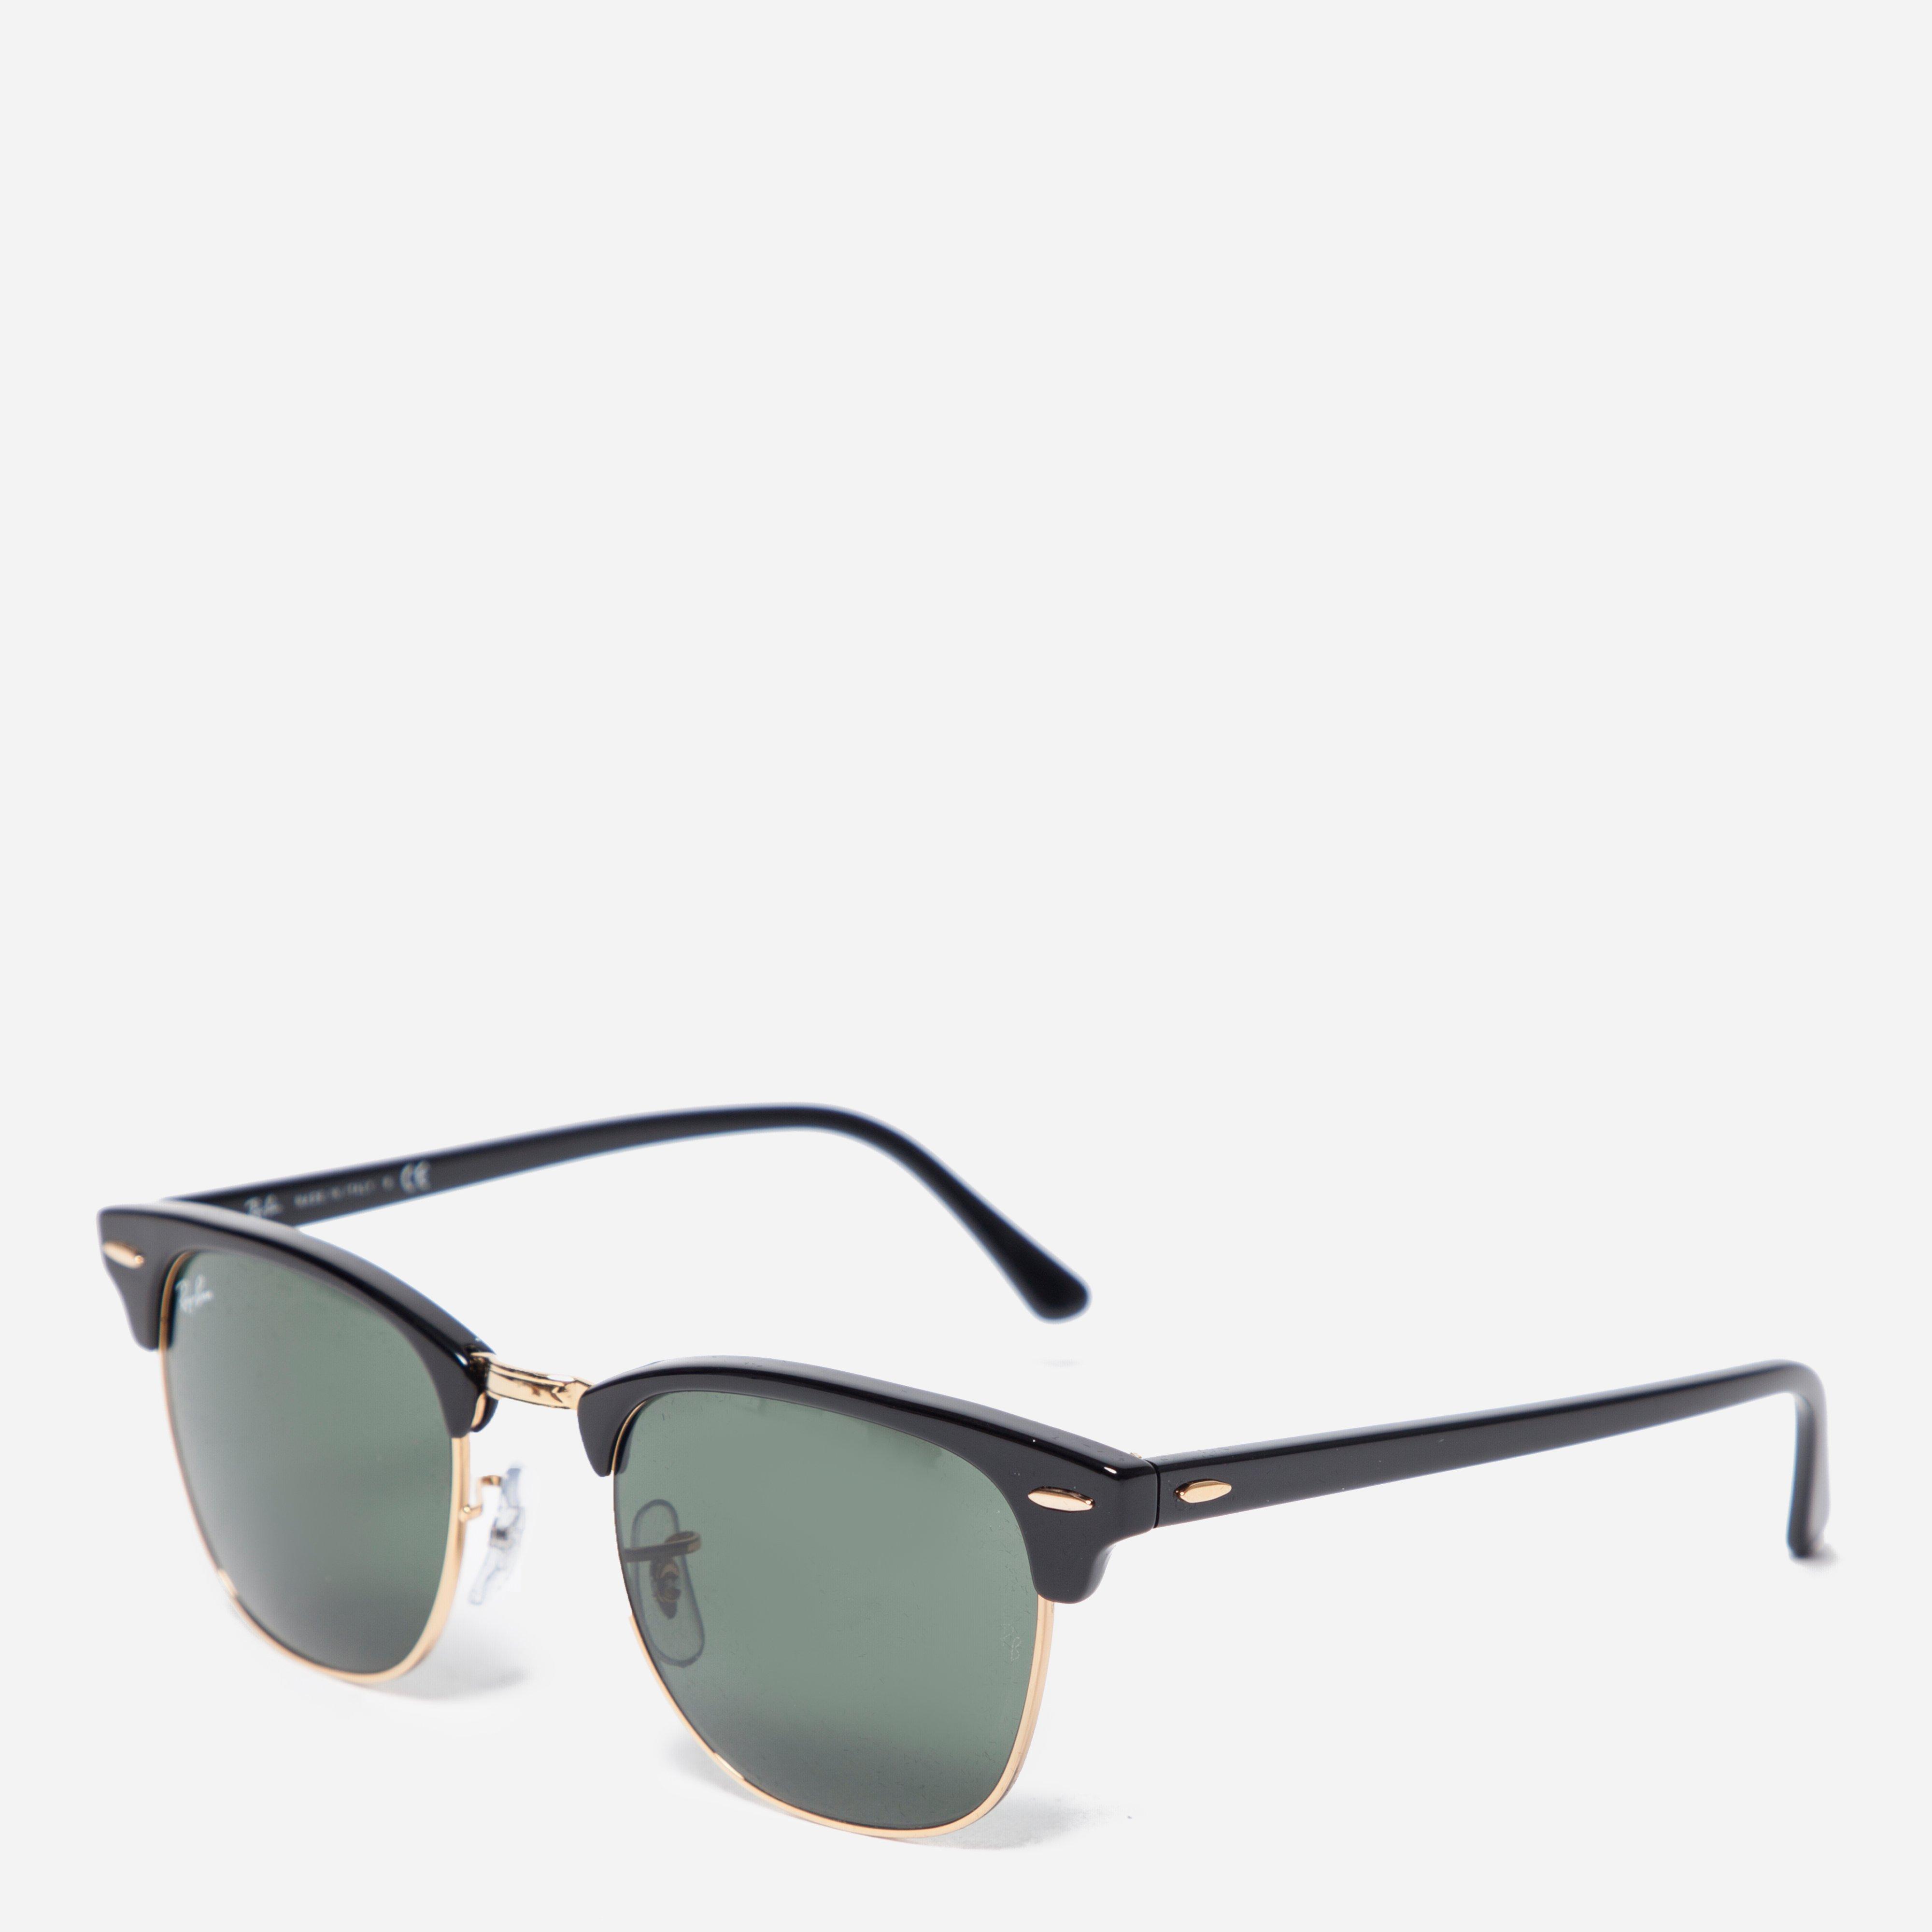 Ray Ban Clubmaster Classic Sunglasses In Black Gold Black For Men Lyst